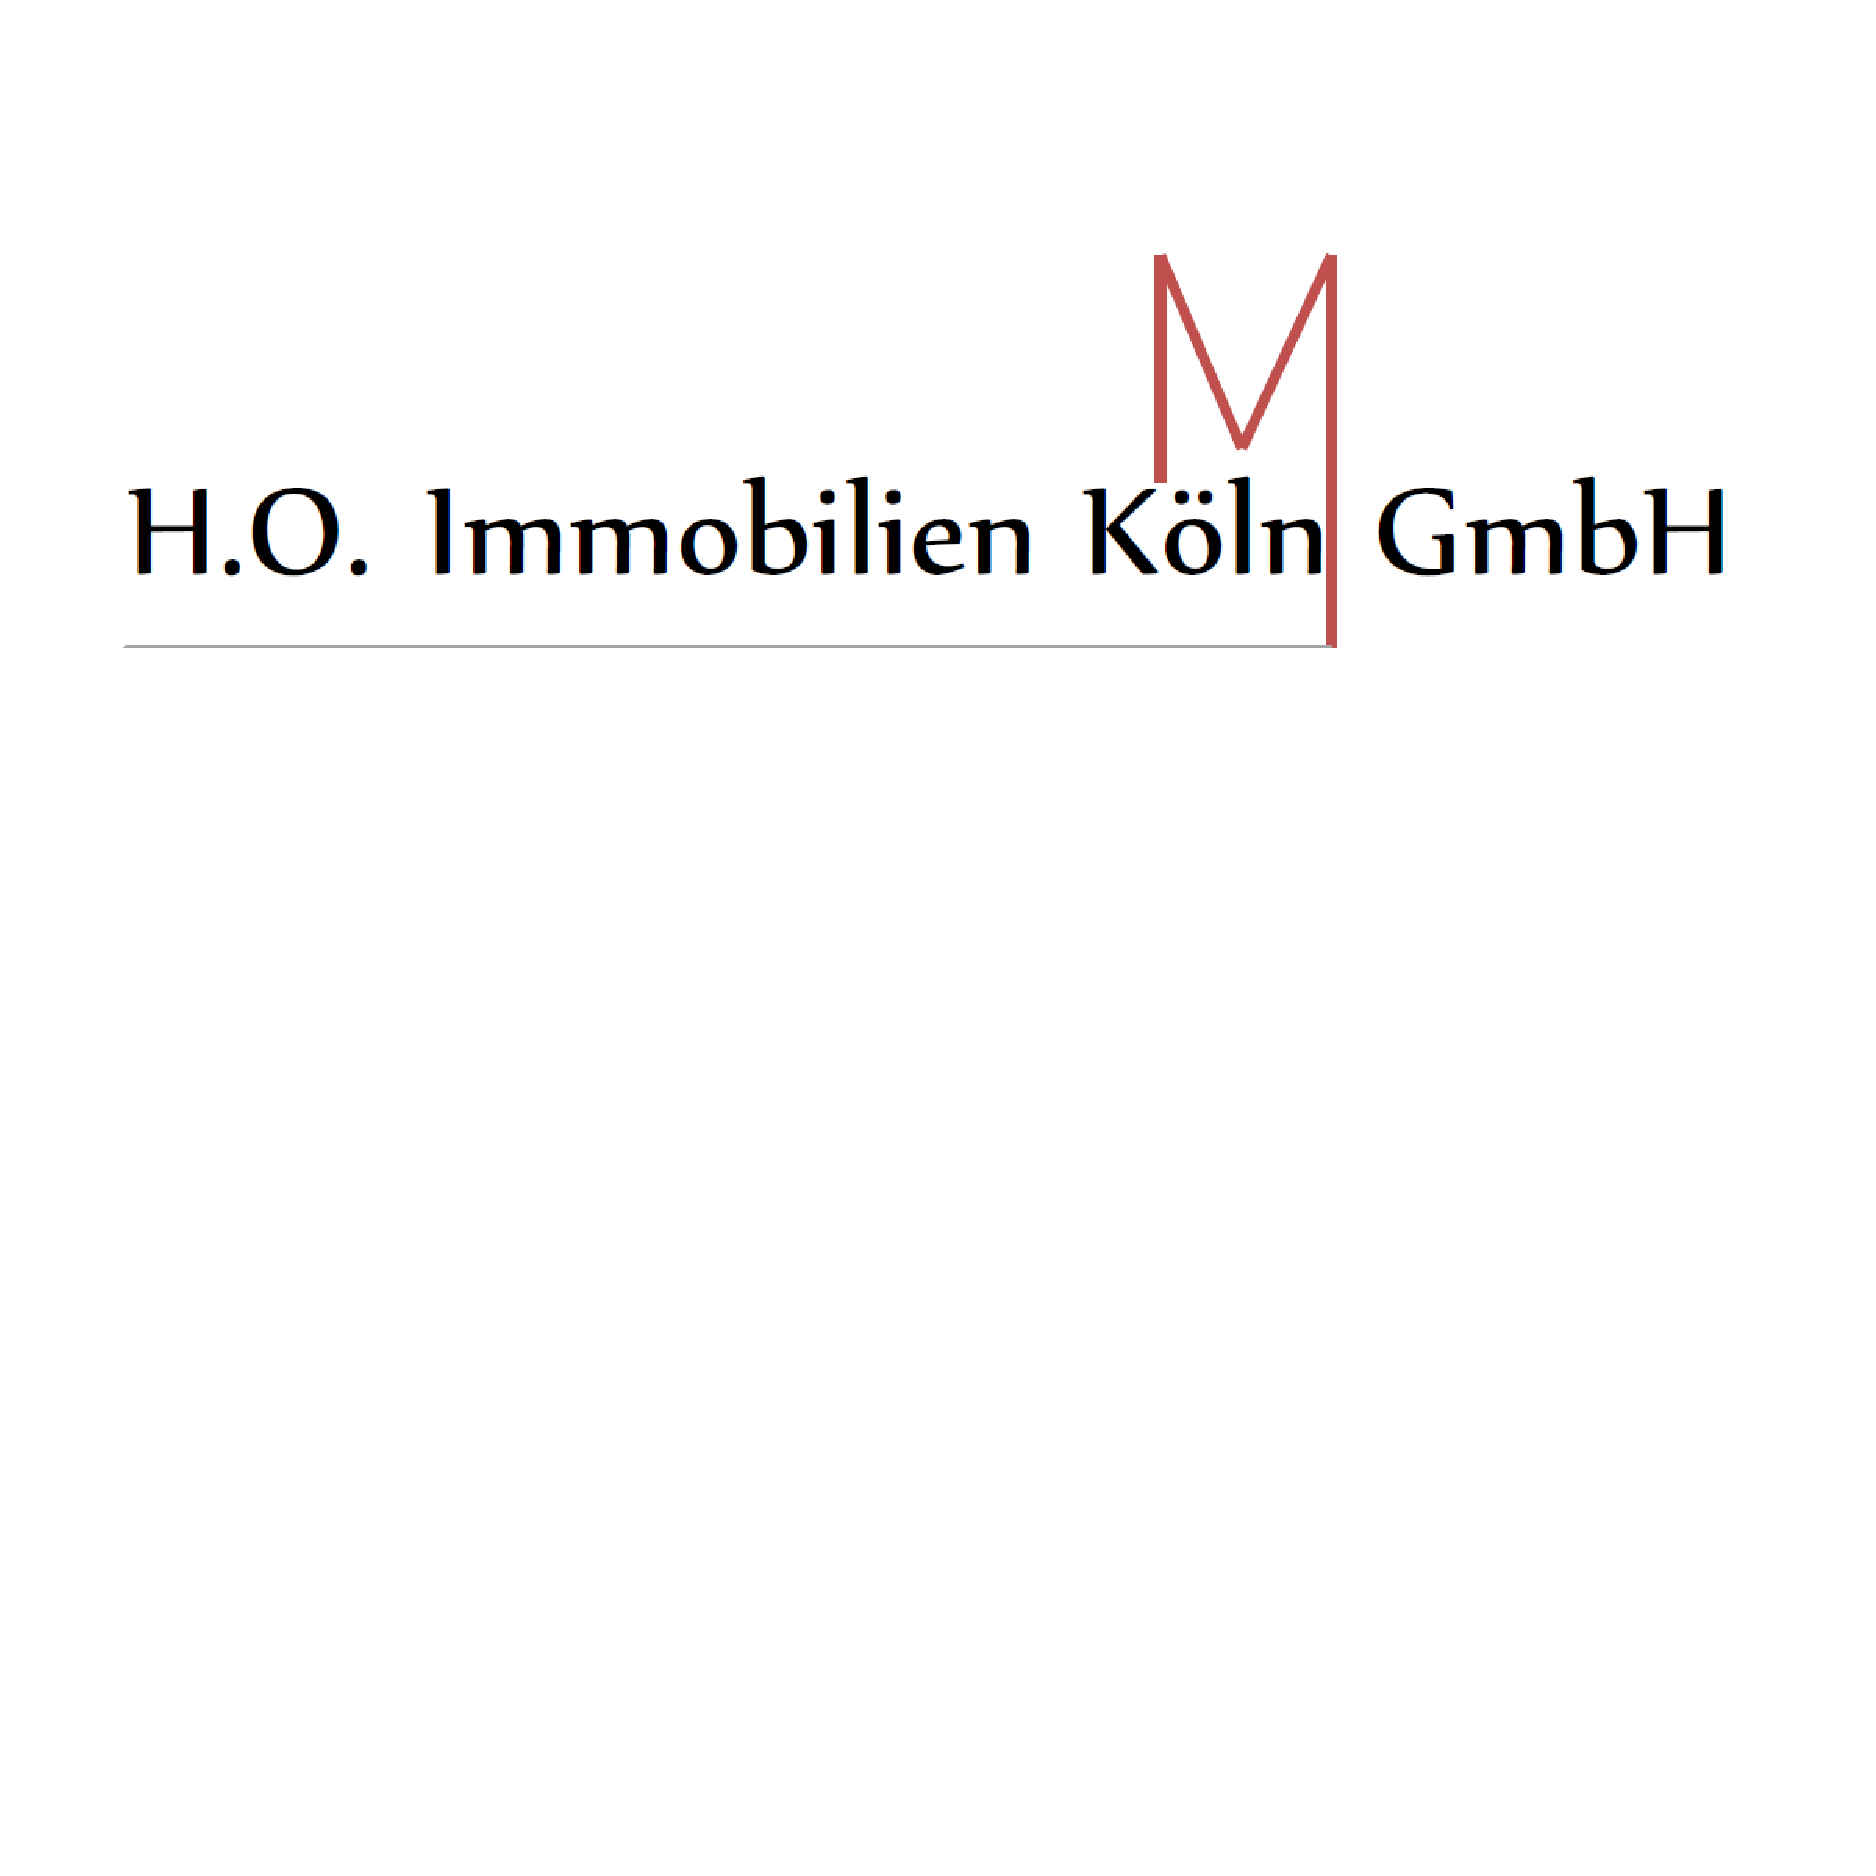 Empfehlung-1x1_H.O.Immobilien.png